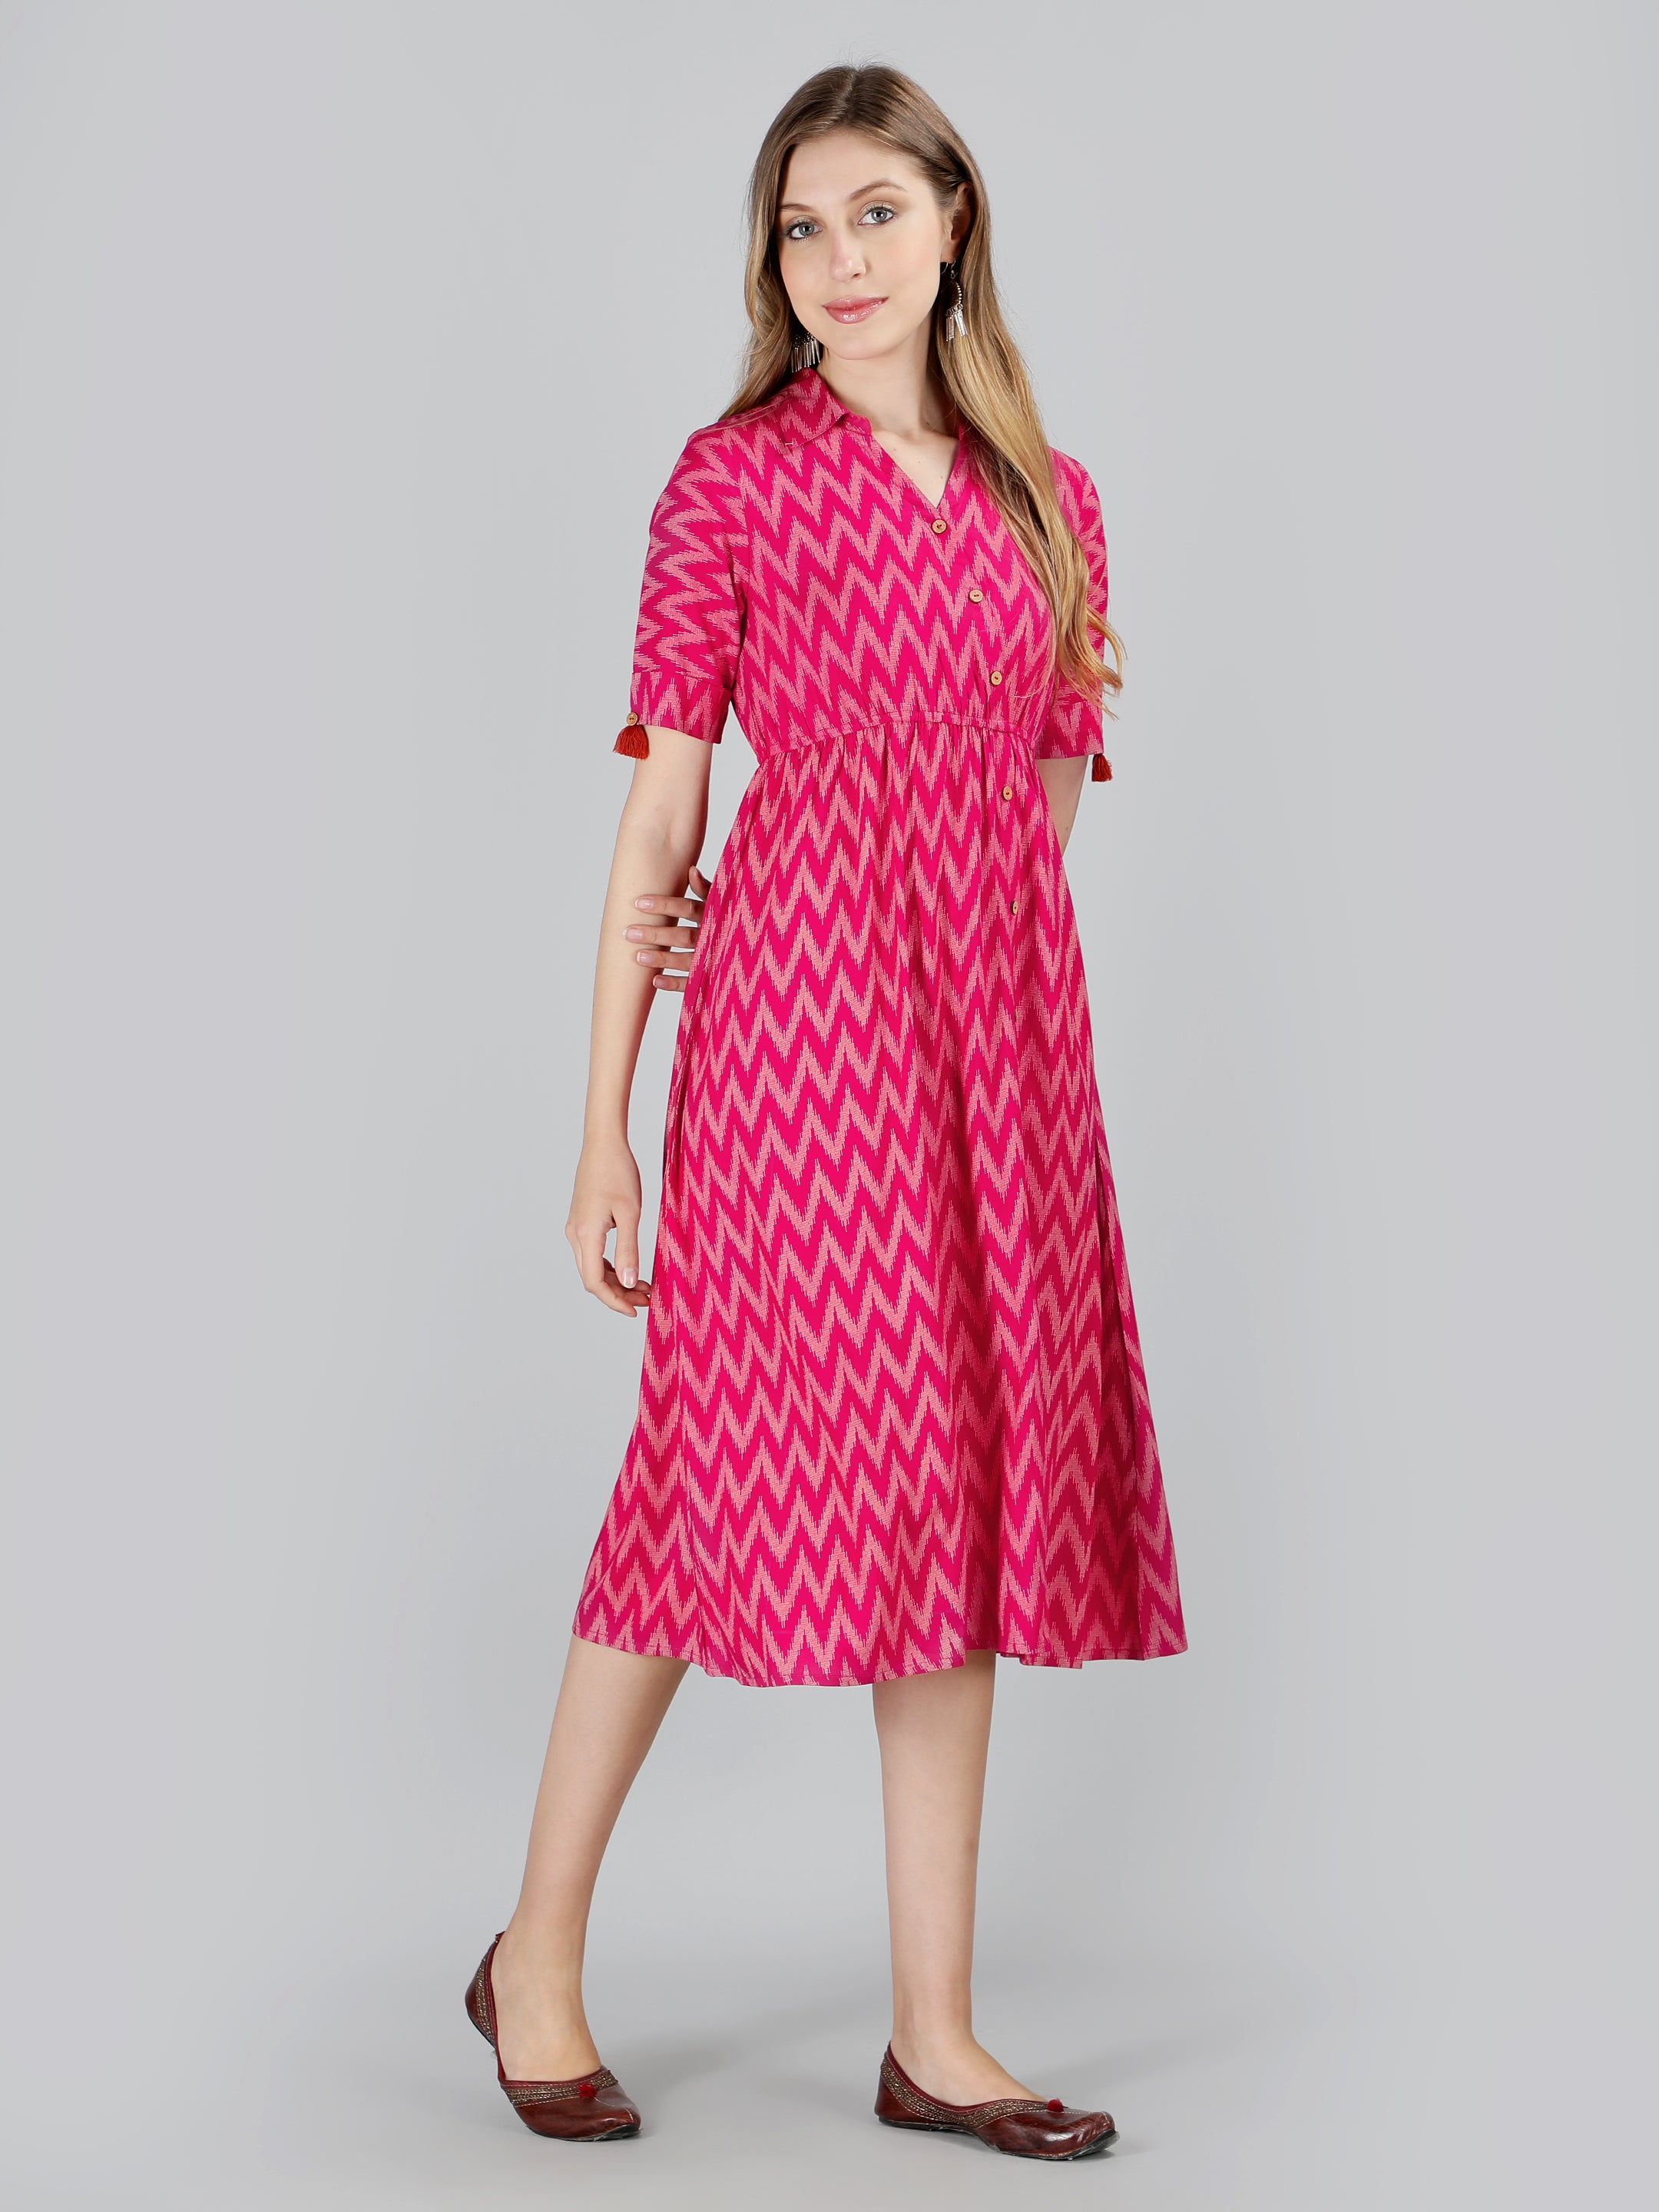 this-classic-shirt-dress-is-a-must-have-for-any-wardrobe-the-simple-clean-lines-flatter-every-figure-while-the-versatile-color-options-make-it-easy-to-find-the-perfect-shade-to-suit-your-style